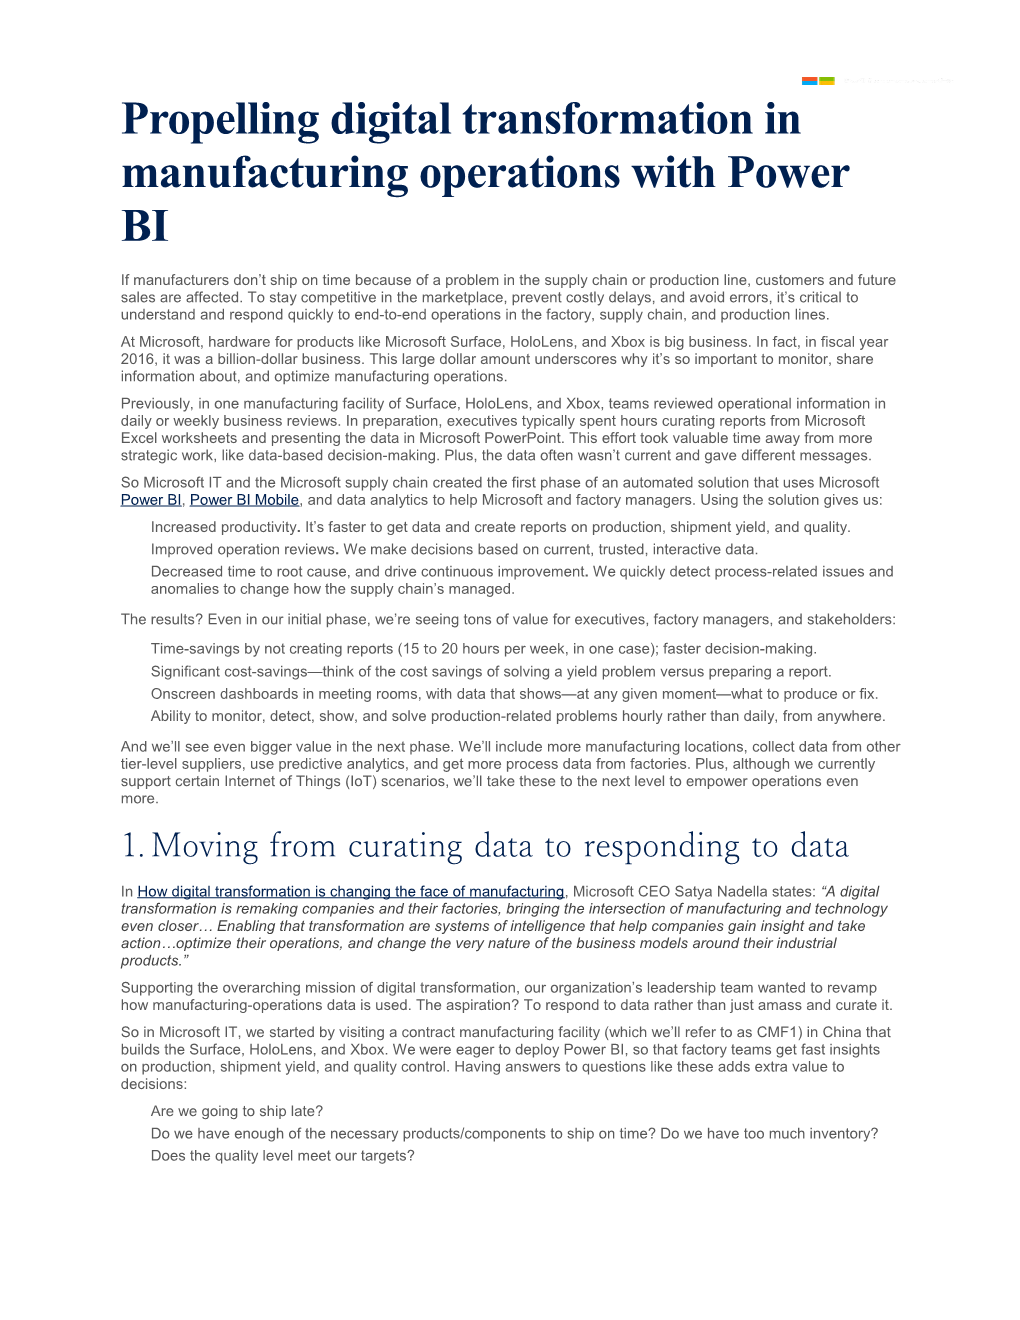 Propelling Digital Transformation in Manufacturing Operations with Power BI